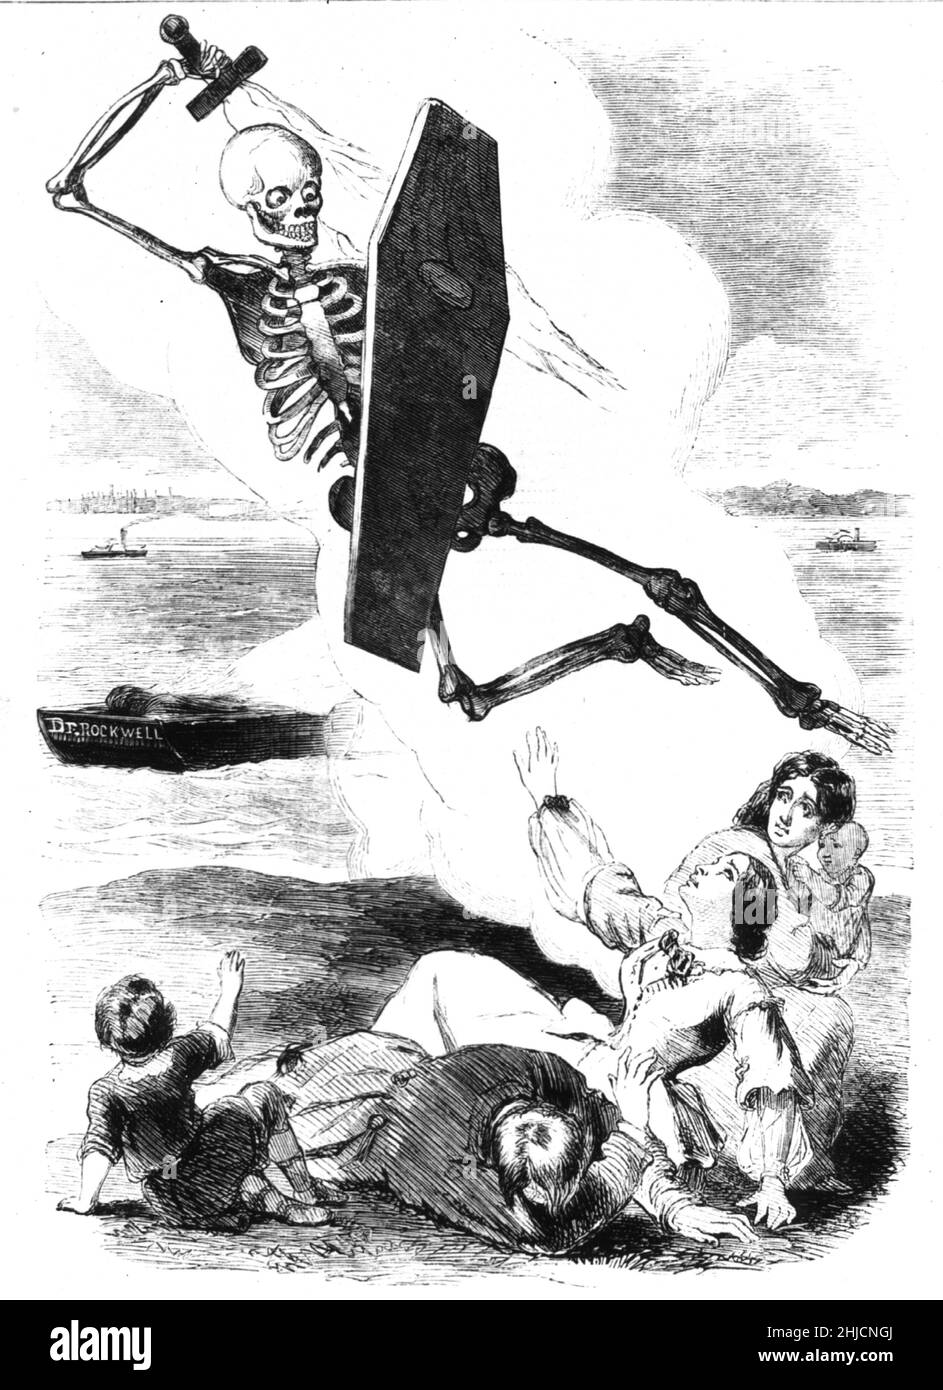 A 19th c. illustration from Harper's Magazine: 'The Quarantine Question. Death, rising from the iron scow, and scattering pestilence among the people. 'While the Angel of Death rides on the fumes of the iron scow, and infected airs and wafted to our shores from the anchorage, we shall have no security against these annual visitations of pestilence' - Dr. Anderson's speech.' Stock Photo